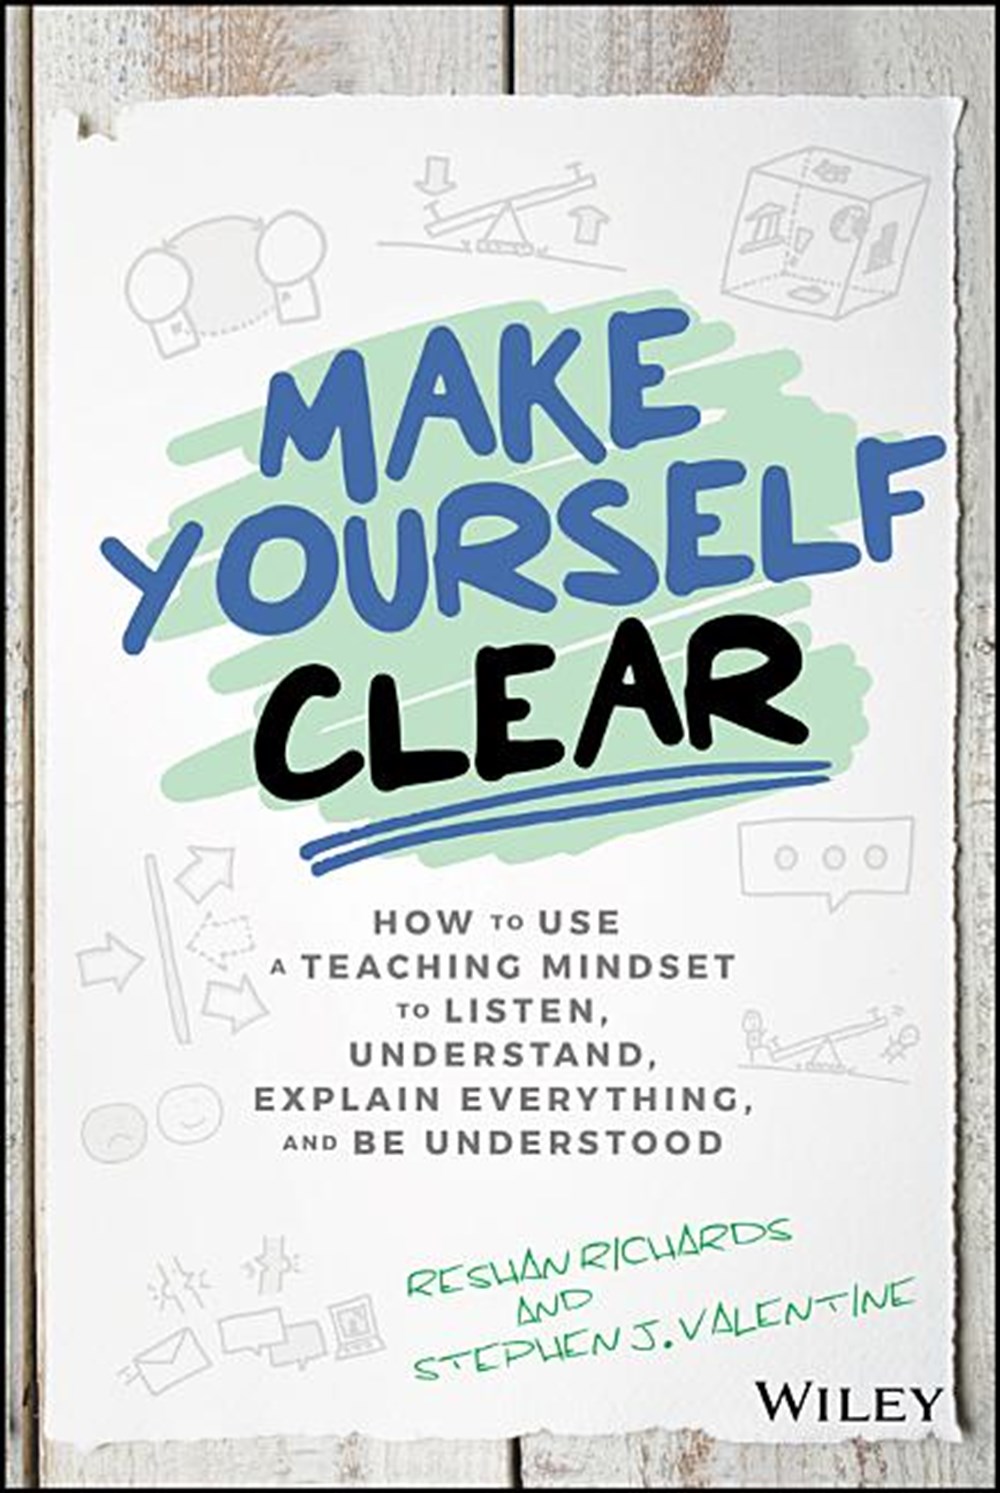 Make Yourself Clear: How to Use a Teaching Mindset to Listen, Understand, Explain Everything, and Be